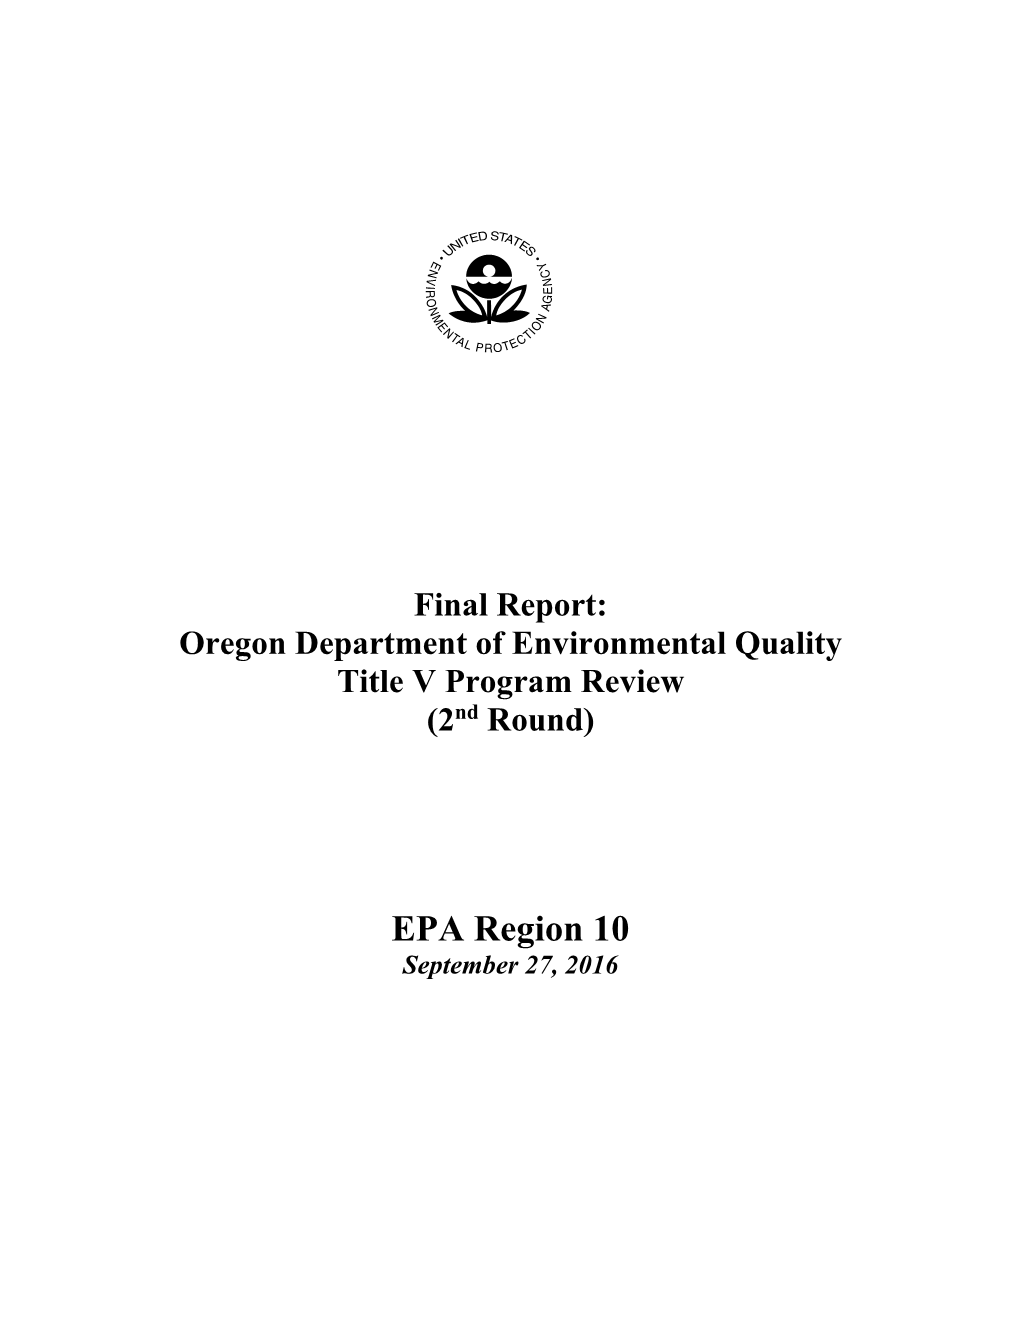 Oregon Department of Environmental Quality Title V Program Review (2Nd Round)